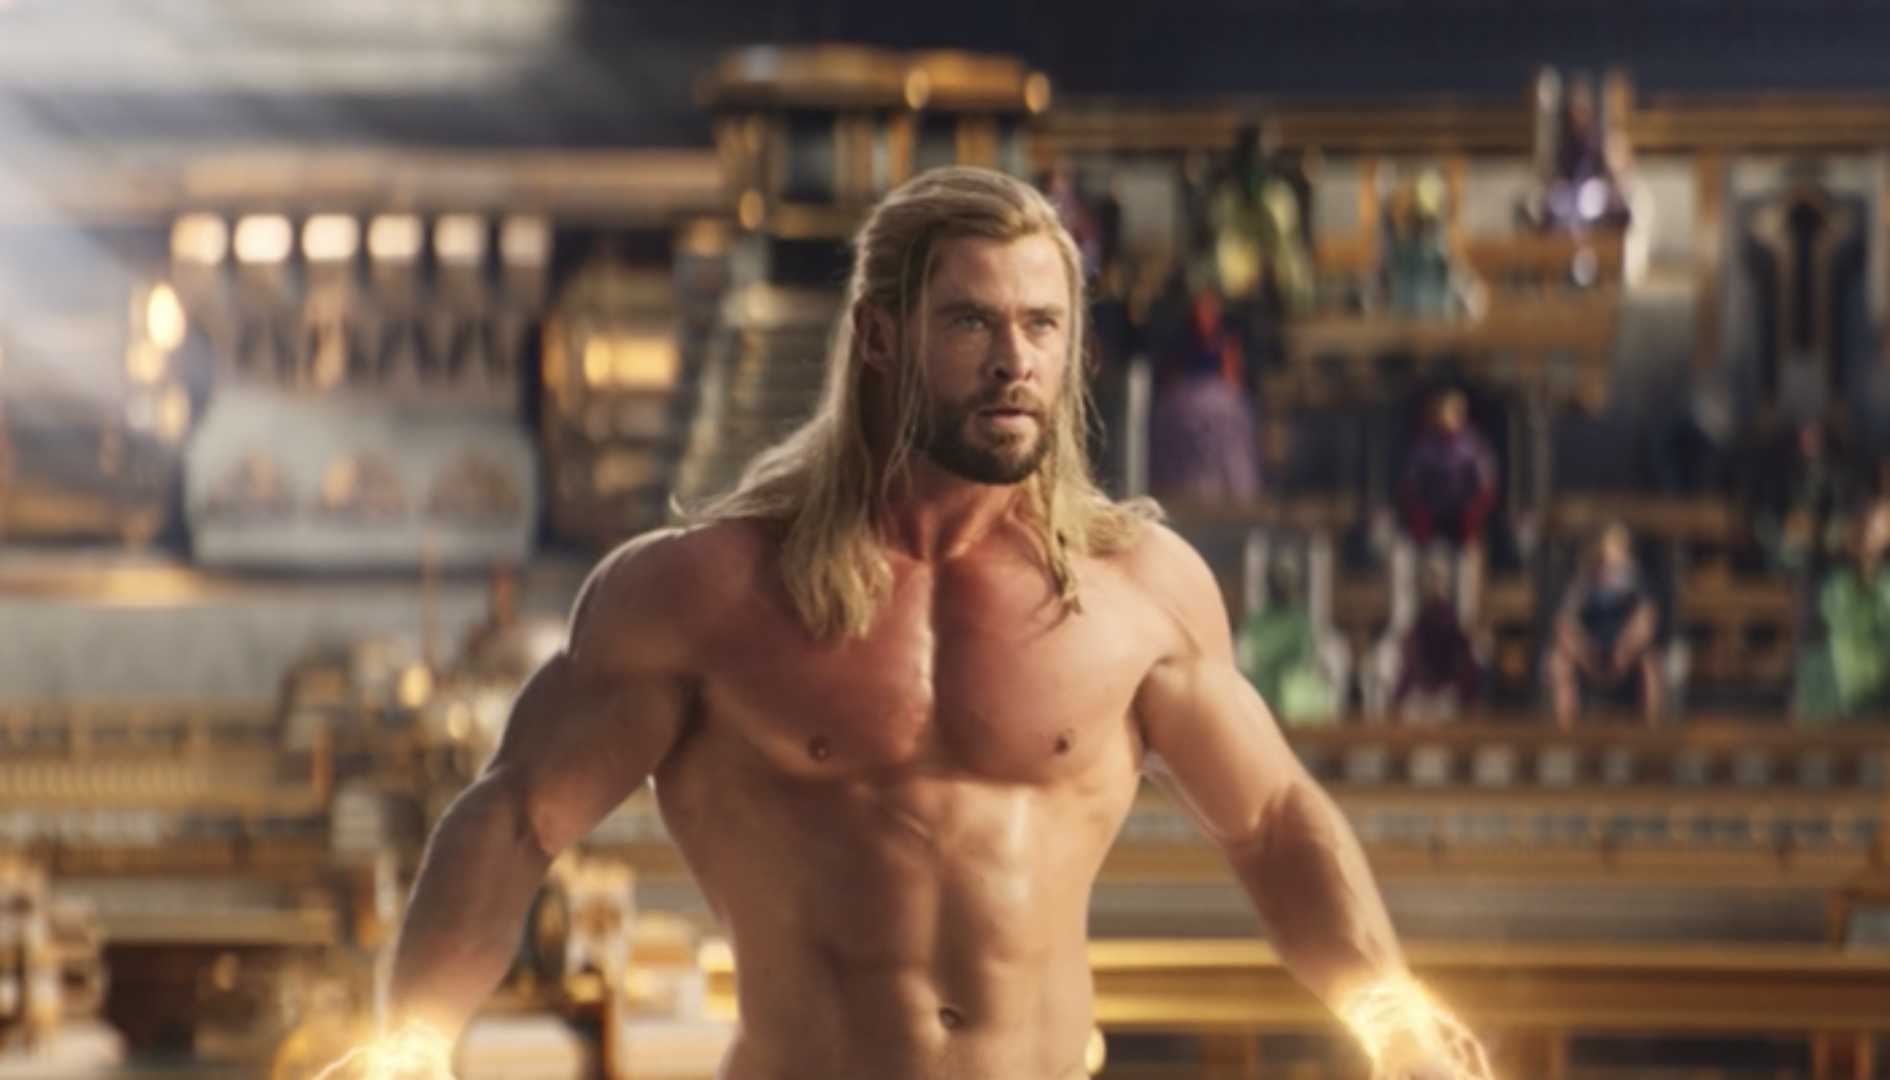 'It had to be unpredictable': Chris Hemsworth's transformation journey with Thor